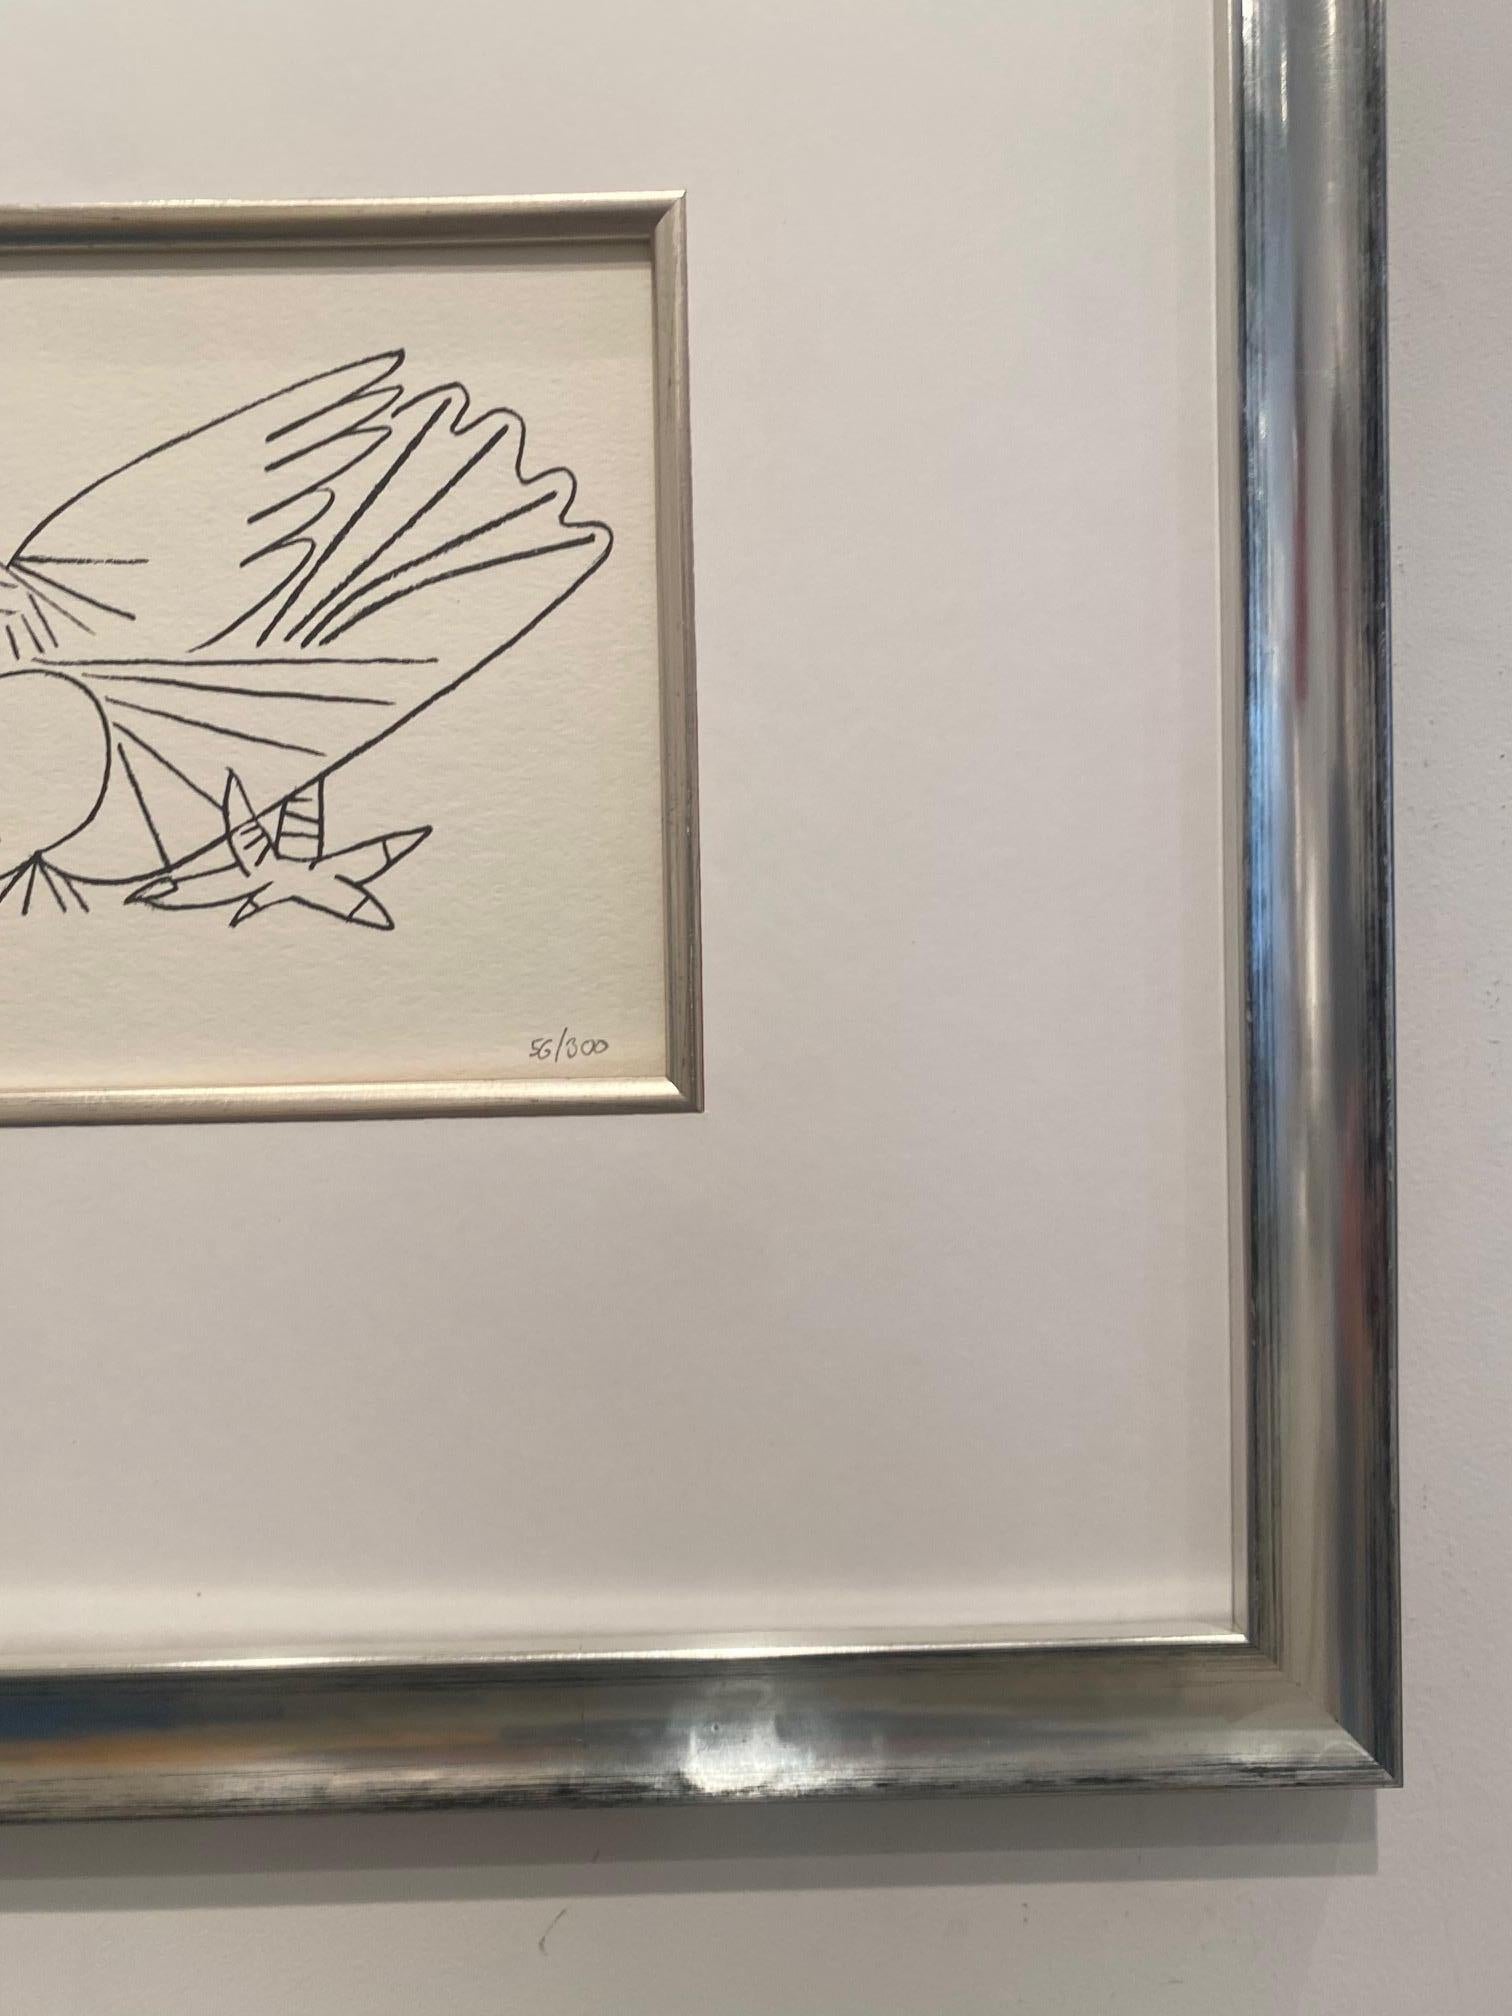 Doves- lithograph from Pablo Picasso depicting two peace doves after his etching 2